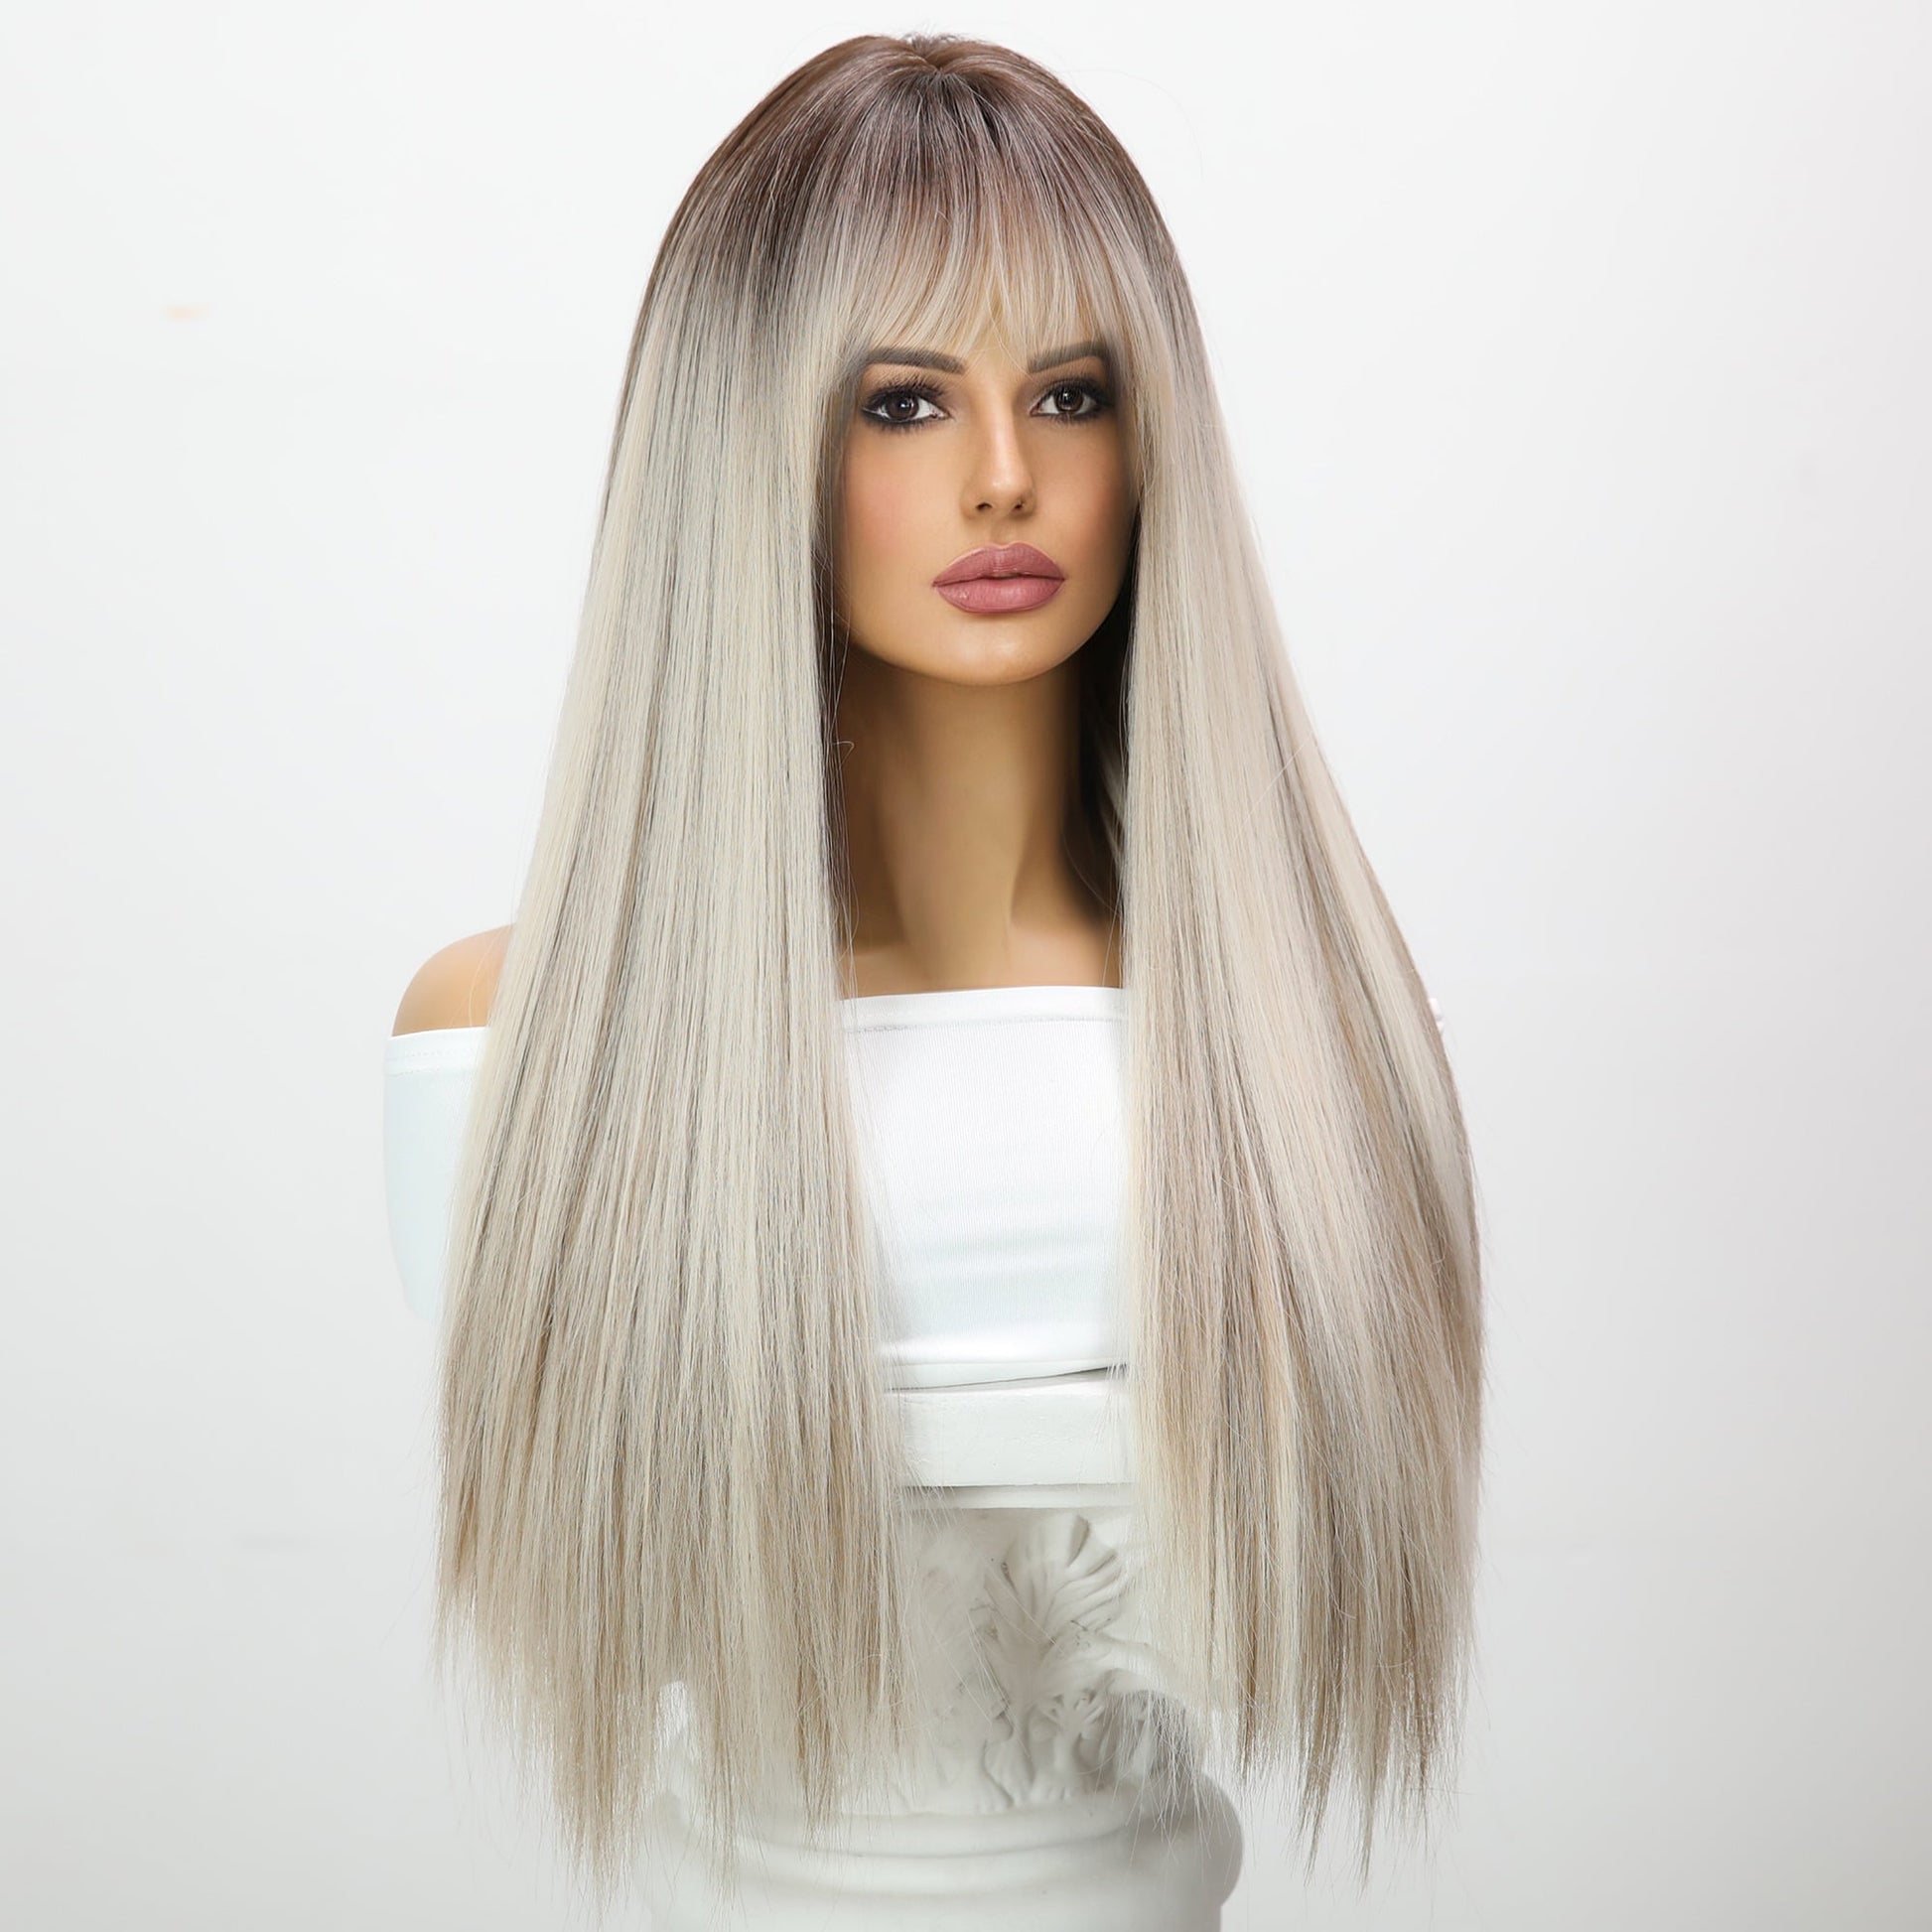 22 Inches | Grey Long Hair | With Hair Bangs | Straight | SM1658 - TapLike